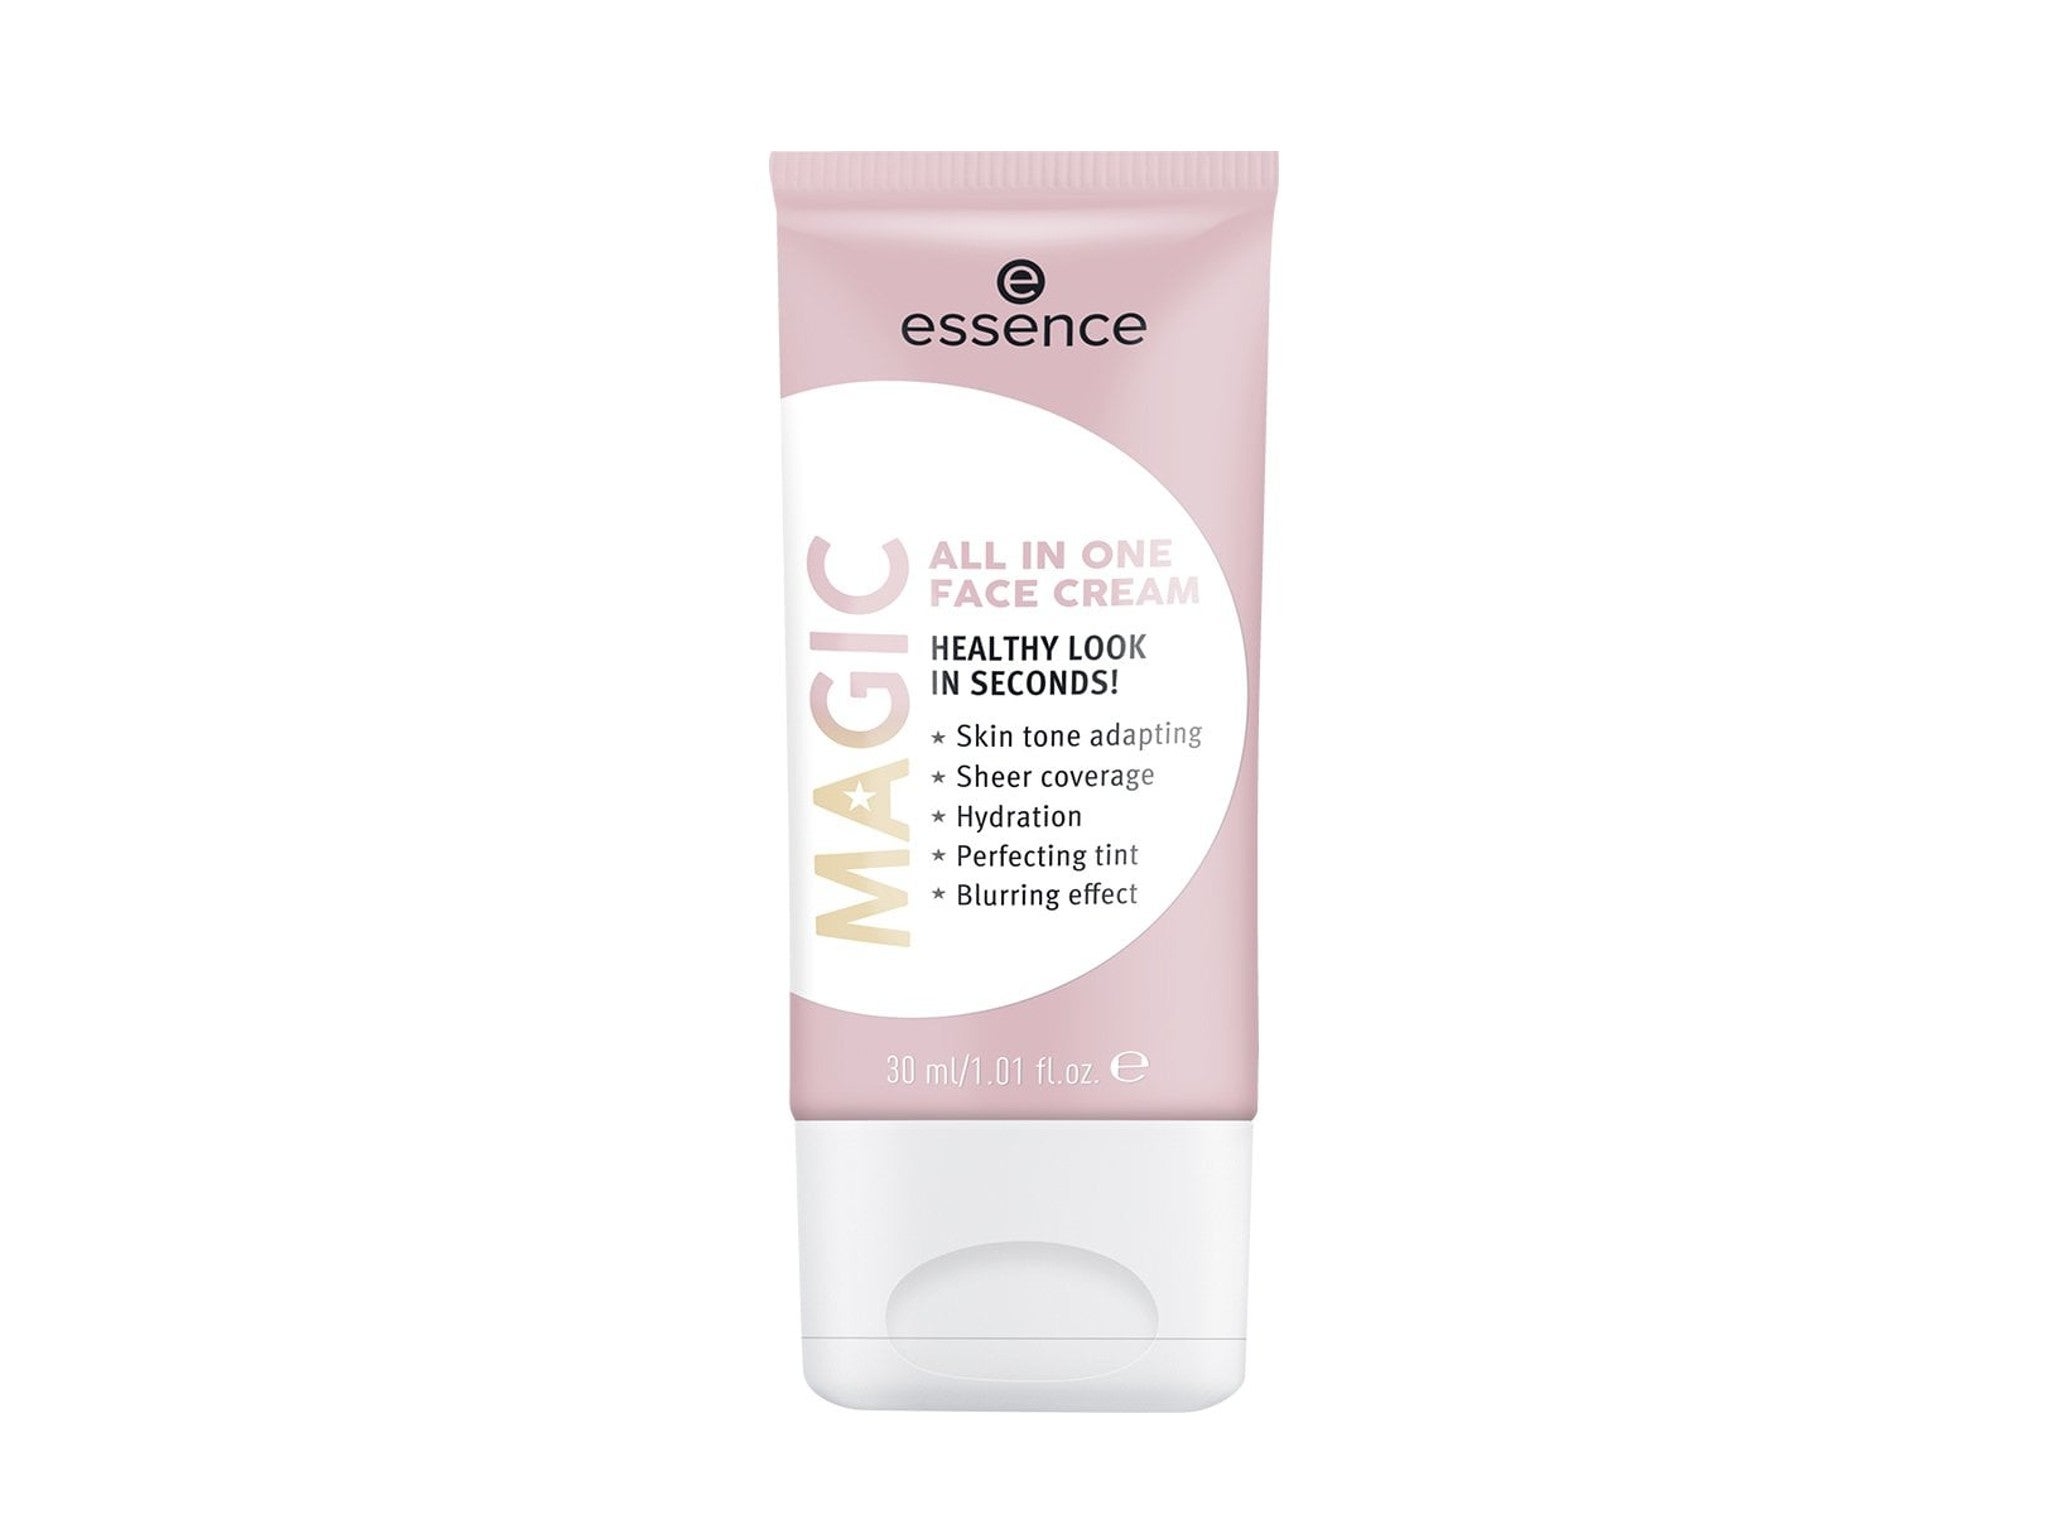 Essence magic all in one face cream indybest.jpg